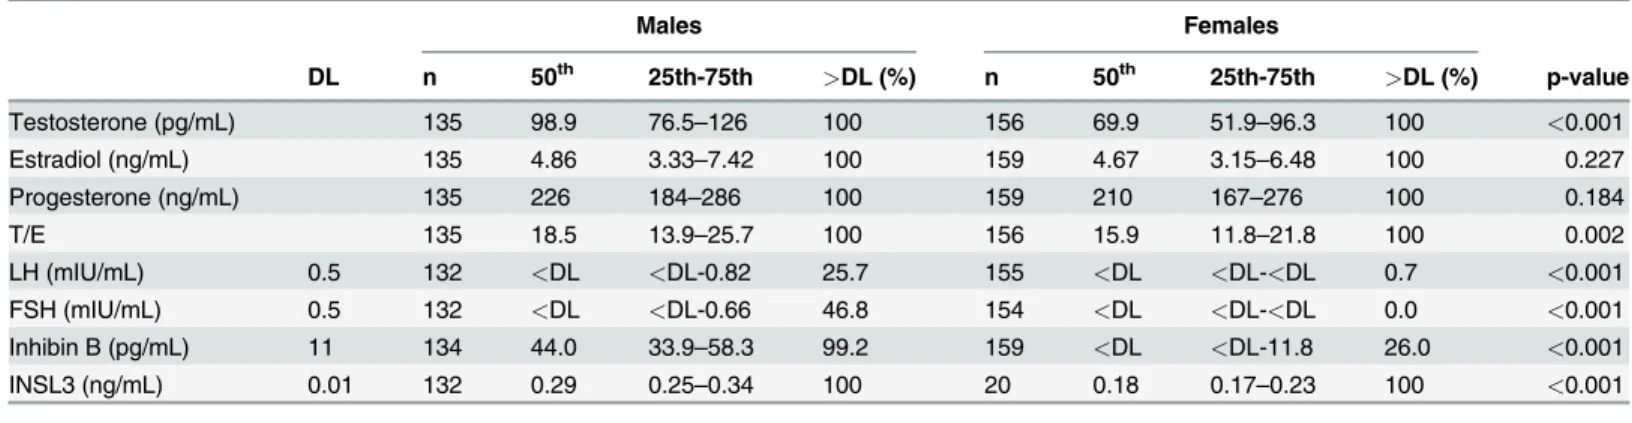 Table 2. Sex hormone levels in cord blood in males and females.